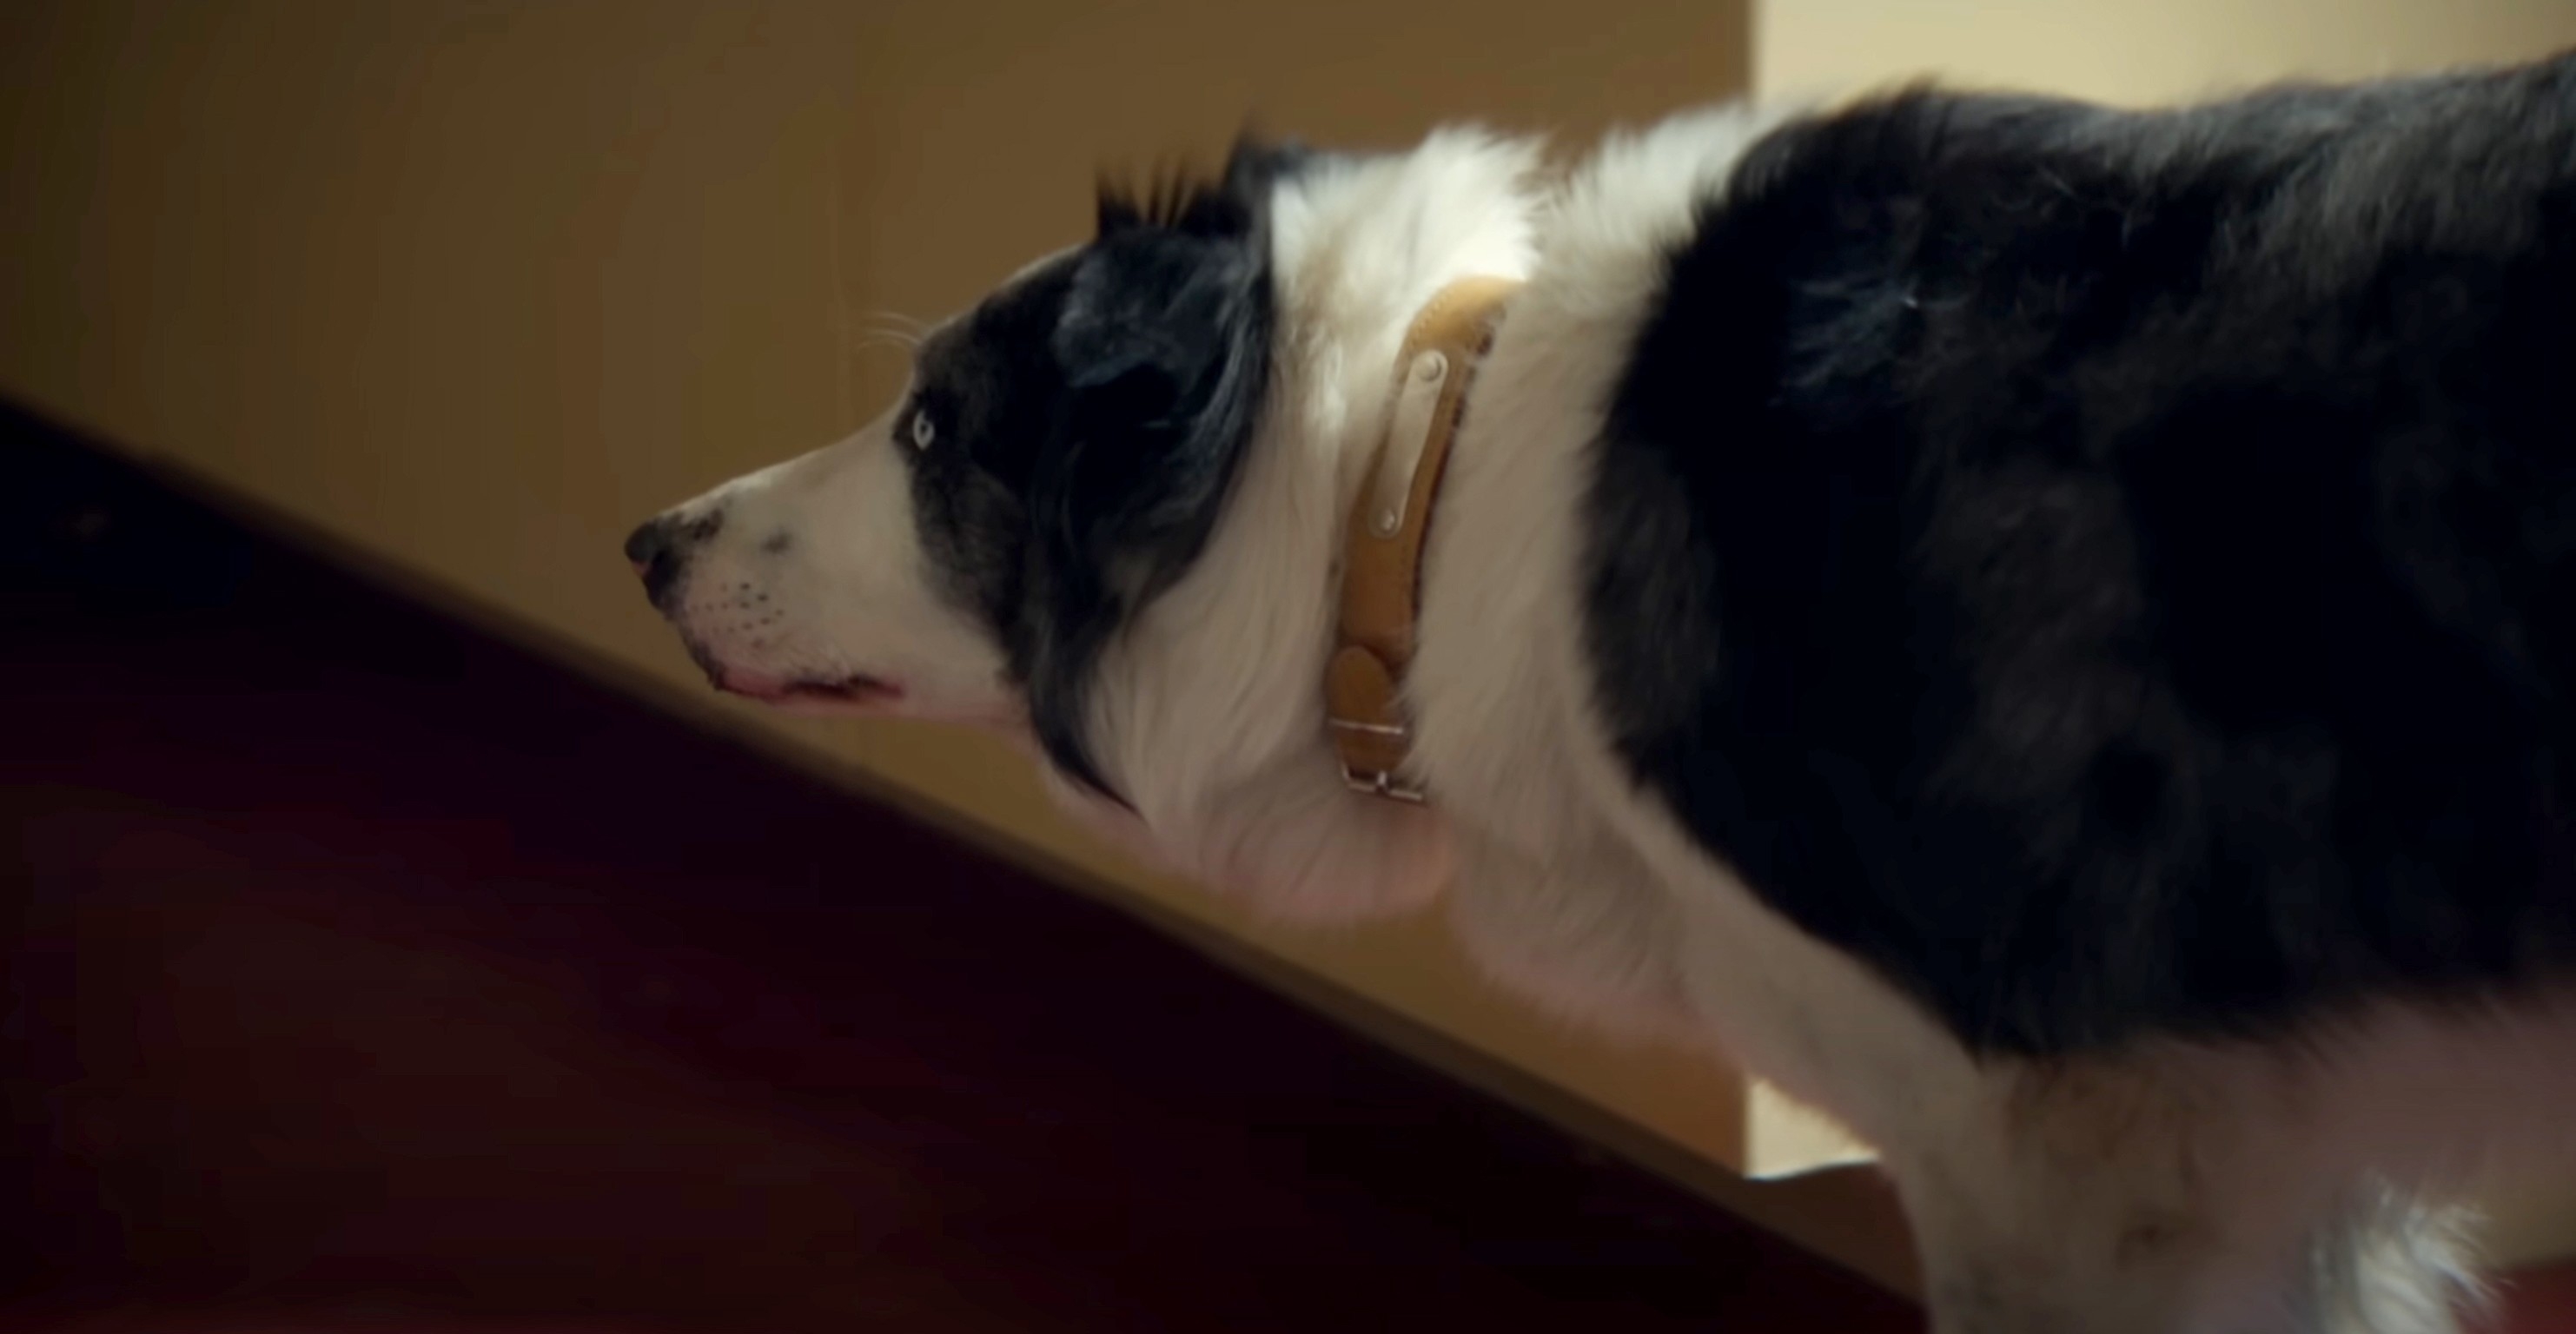 Border Collie peering over edge, scene from a TV show or movie